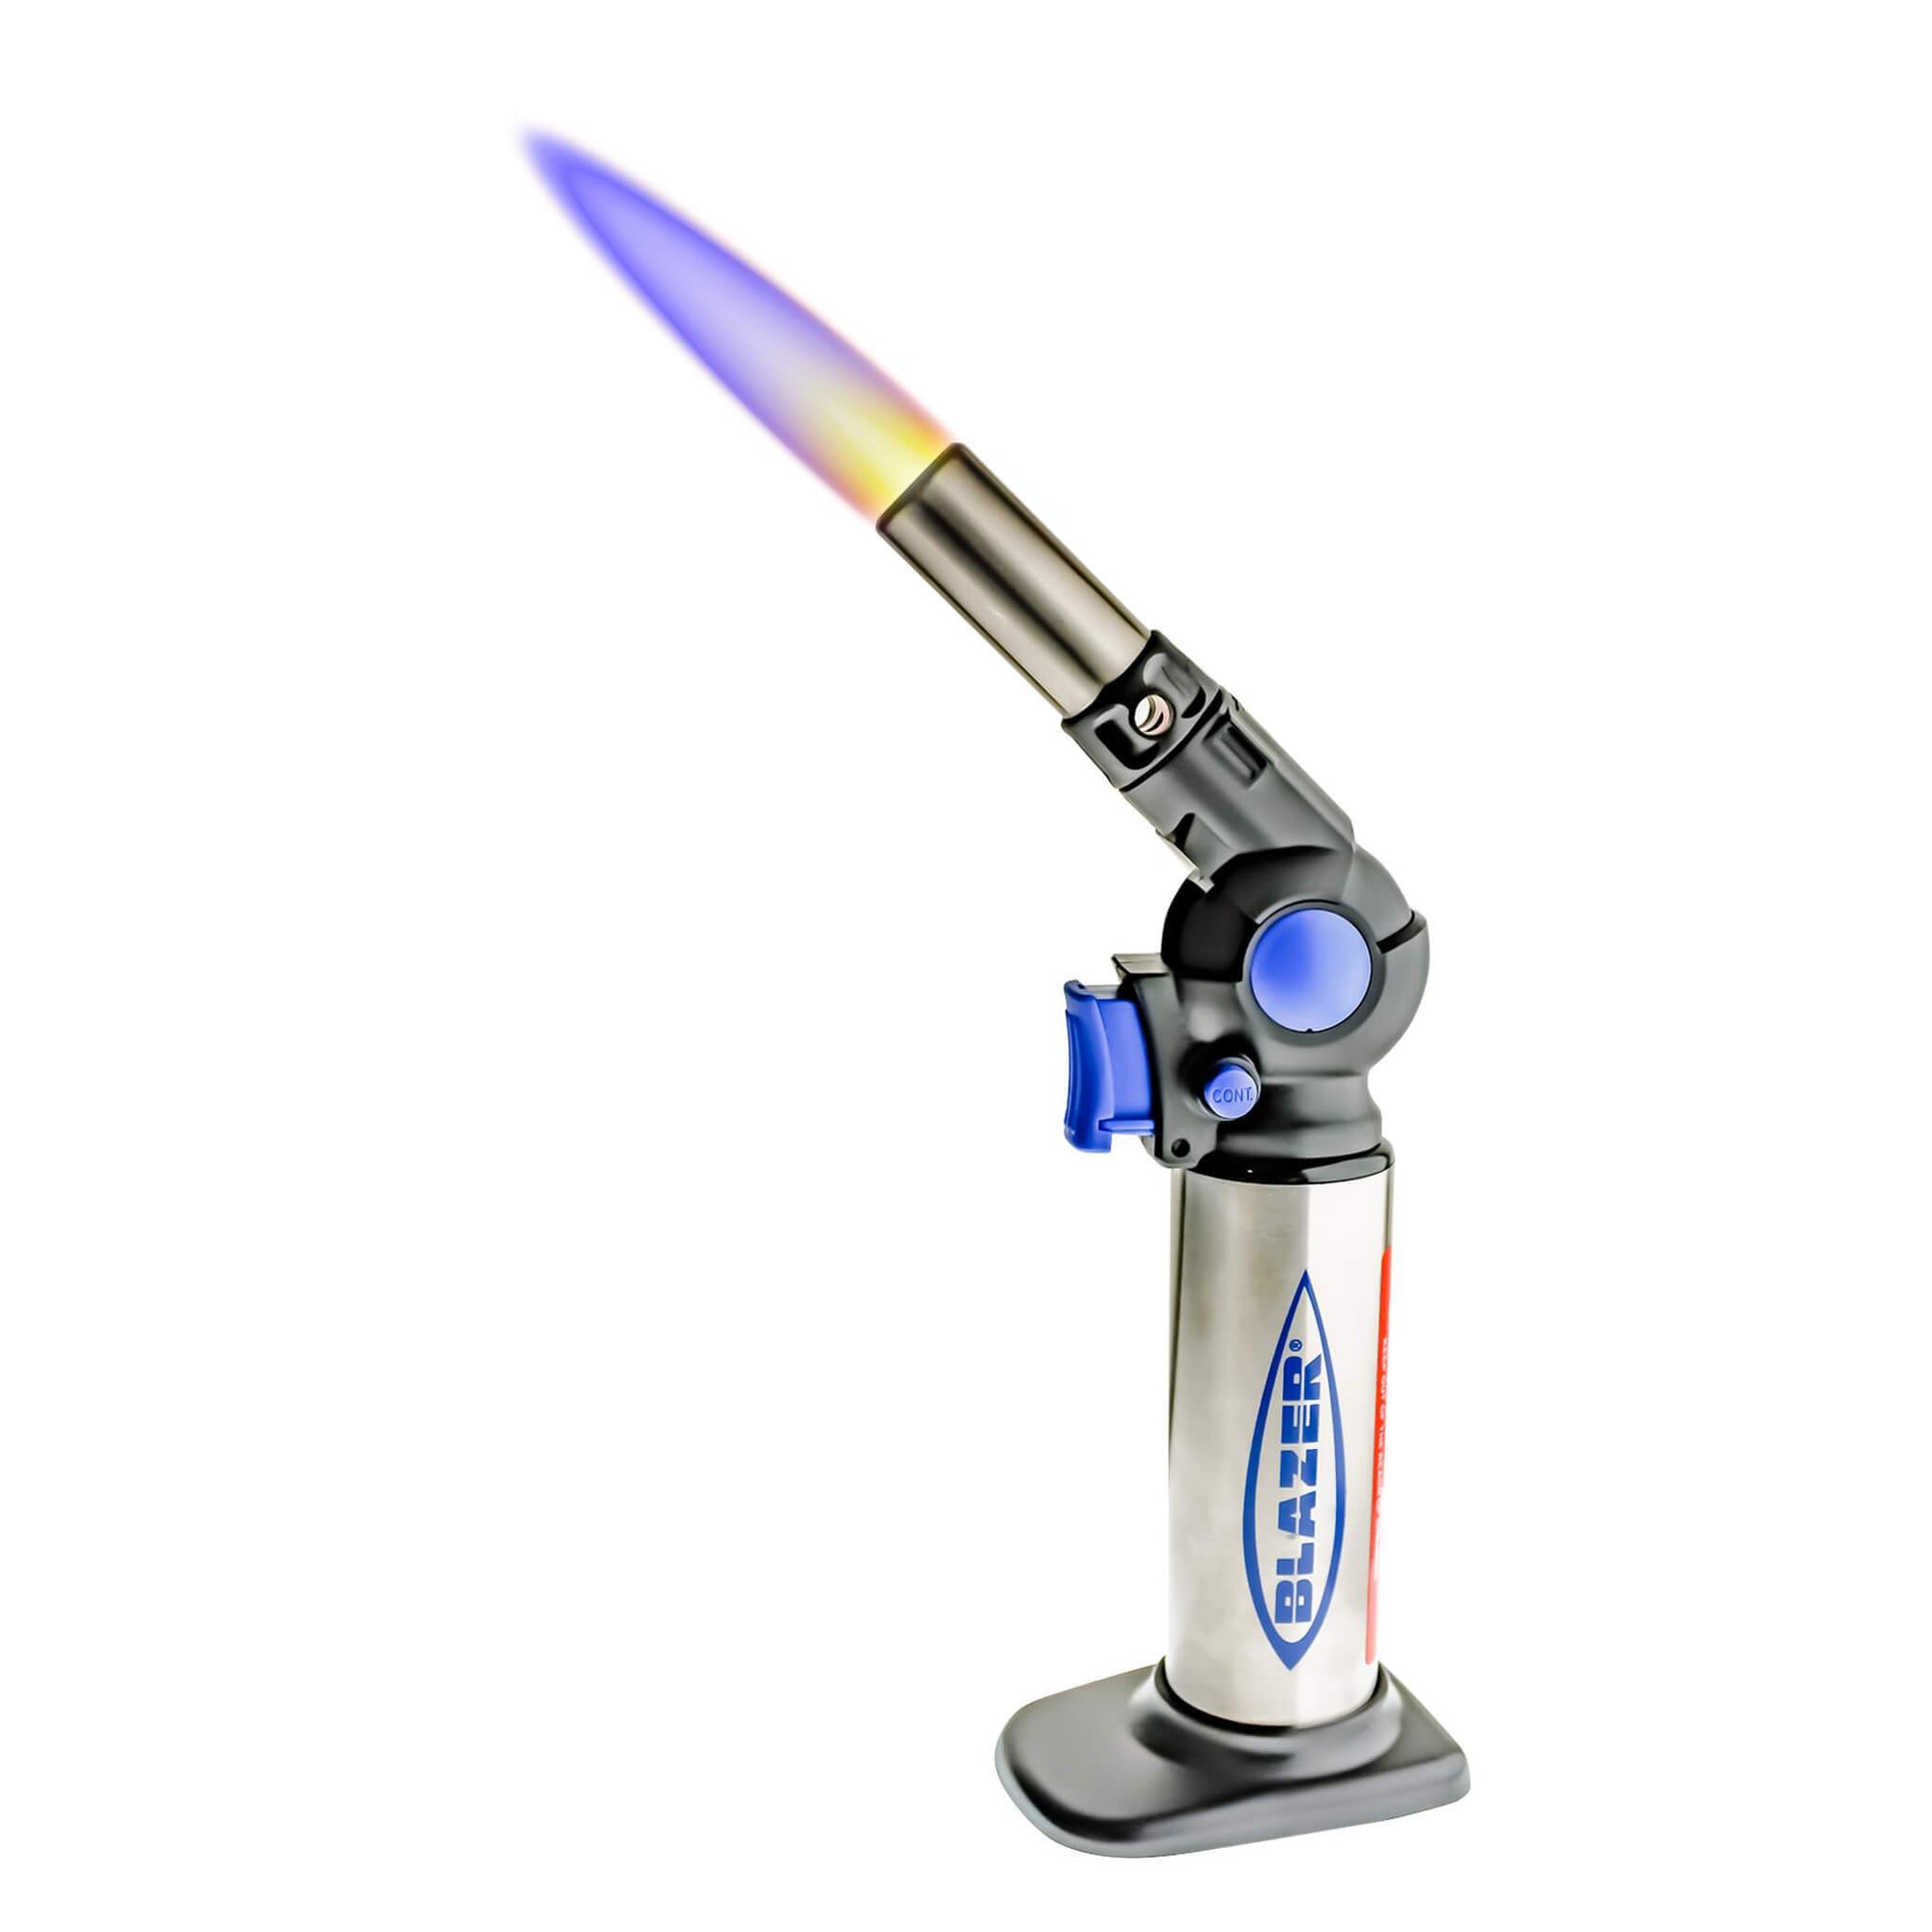 Blazer Flexible Turbo Torch | Blue & Black Angled Profile View With Flame | the dabbing specialists